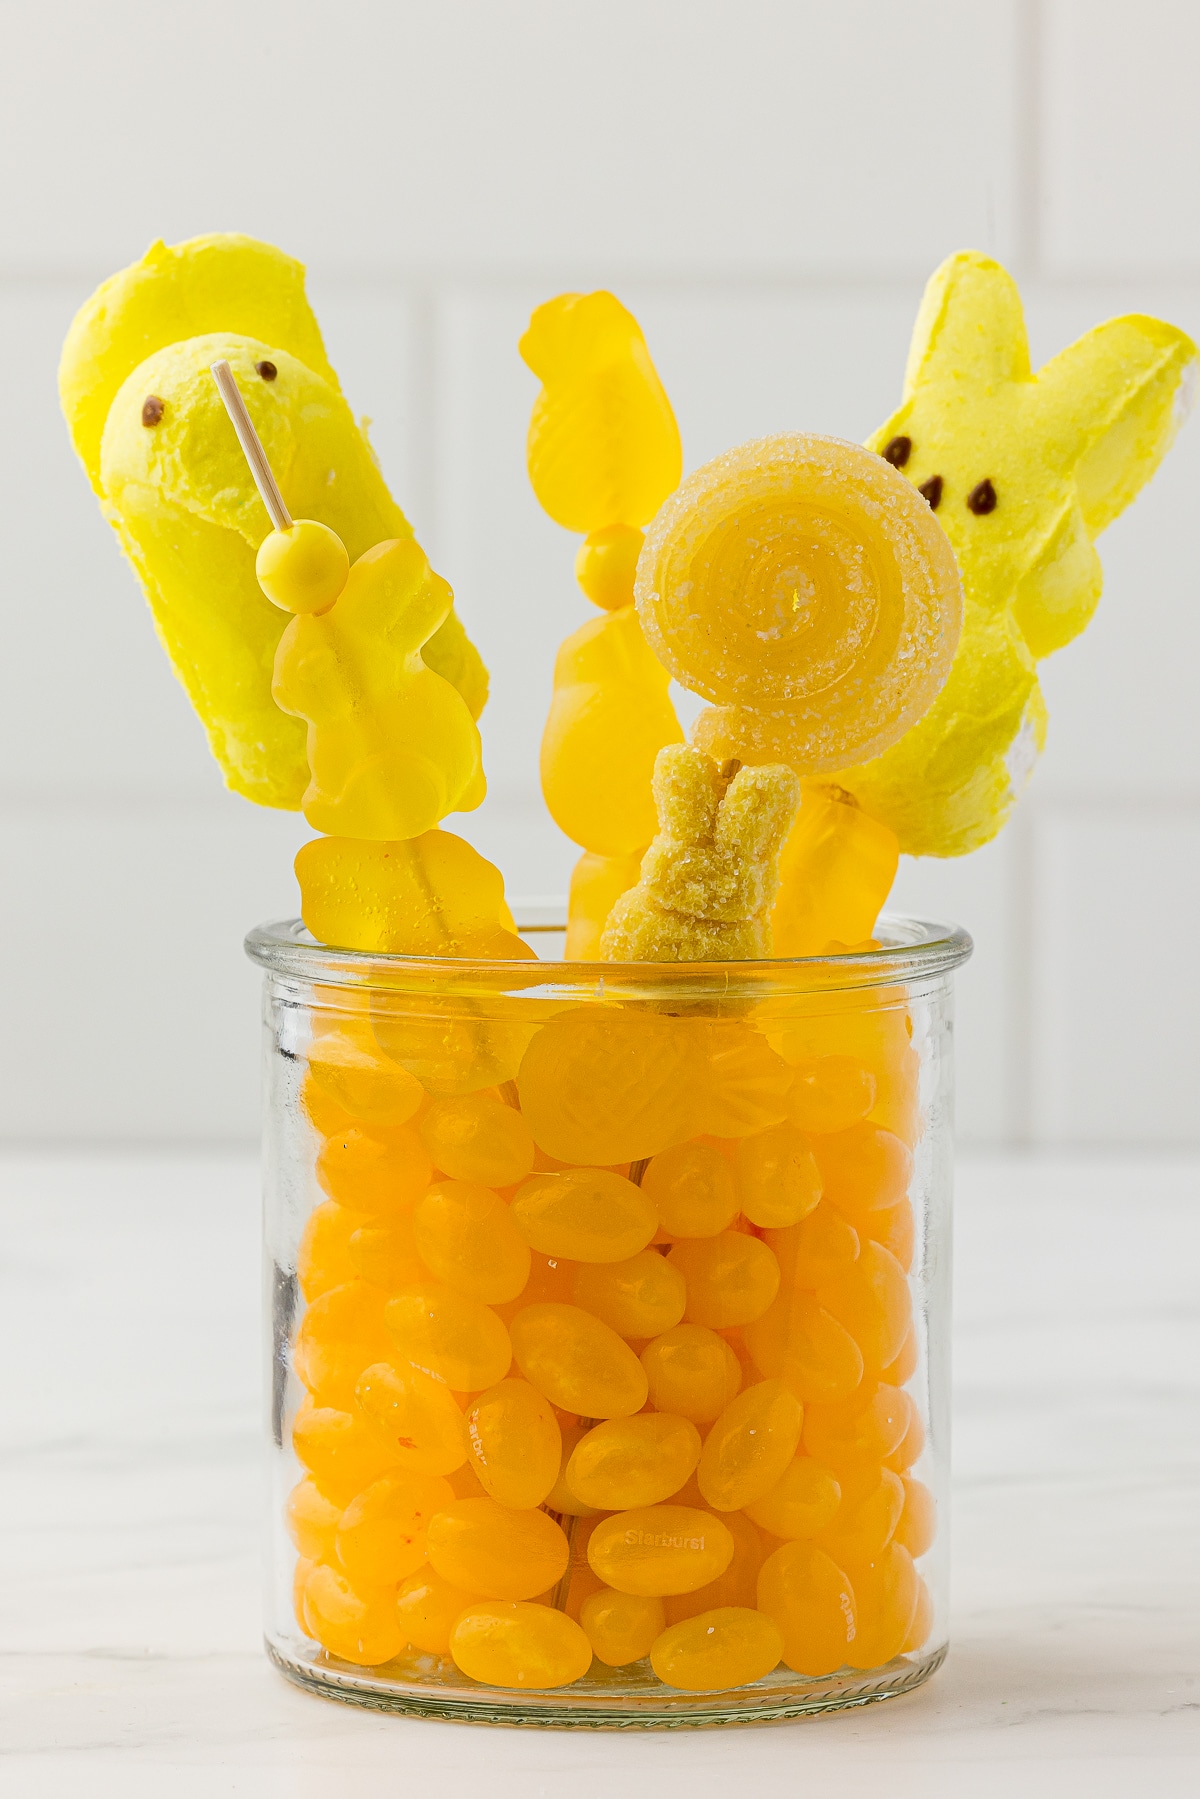 Yellow jelly beans in a small jar with yellow candy kabobs made with yellow gummy and yellow chick and bunny marshmallow peeps candy on a white countertop.